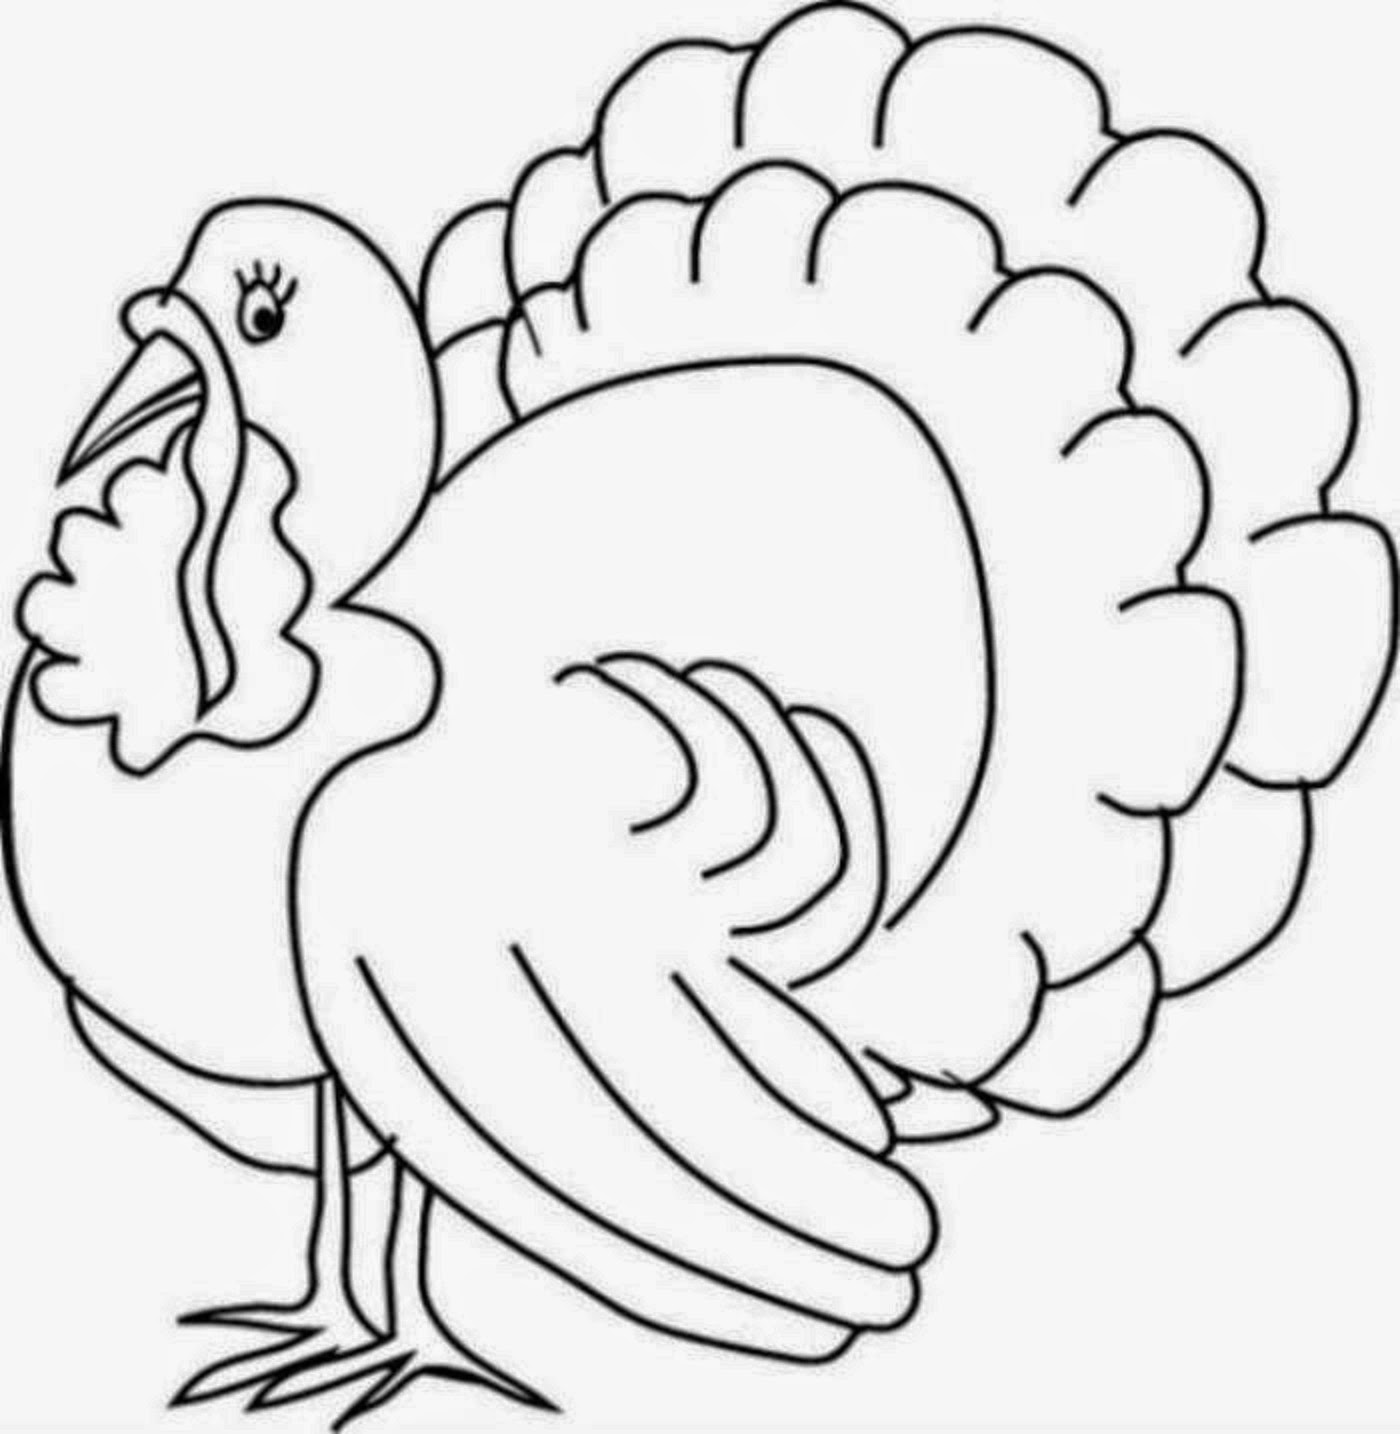 Download colours drawing wallpaper: Printable Thanksgiving Coloring Page for Kids of a Cute Cartoon ...